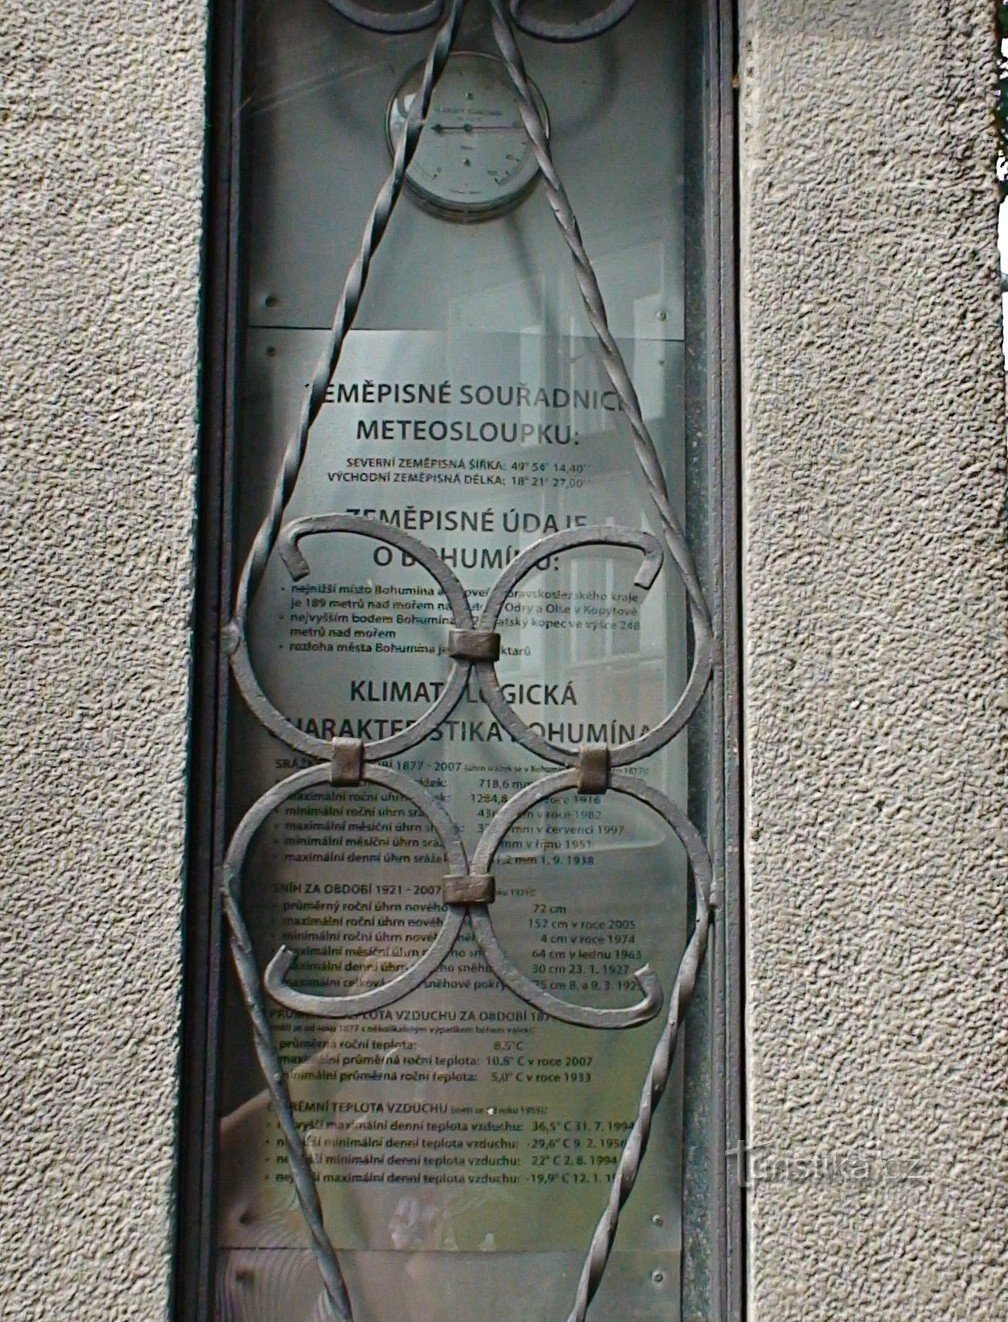 Bohumín geographical information and barometer